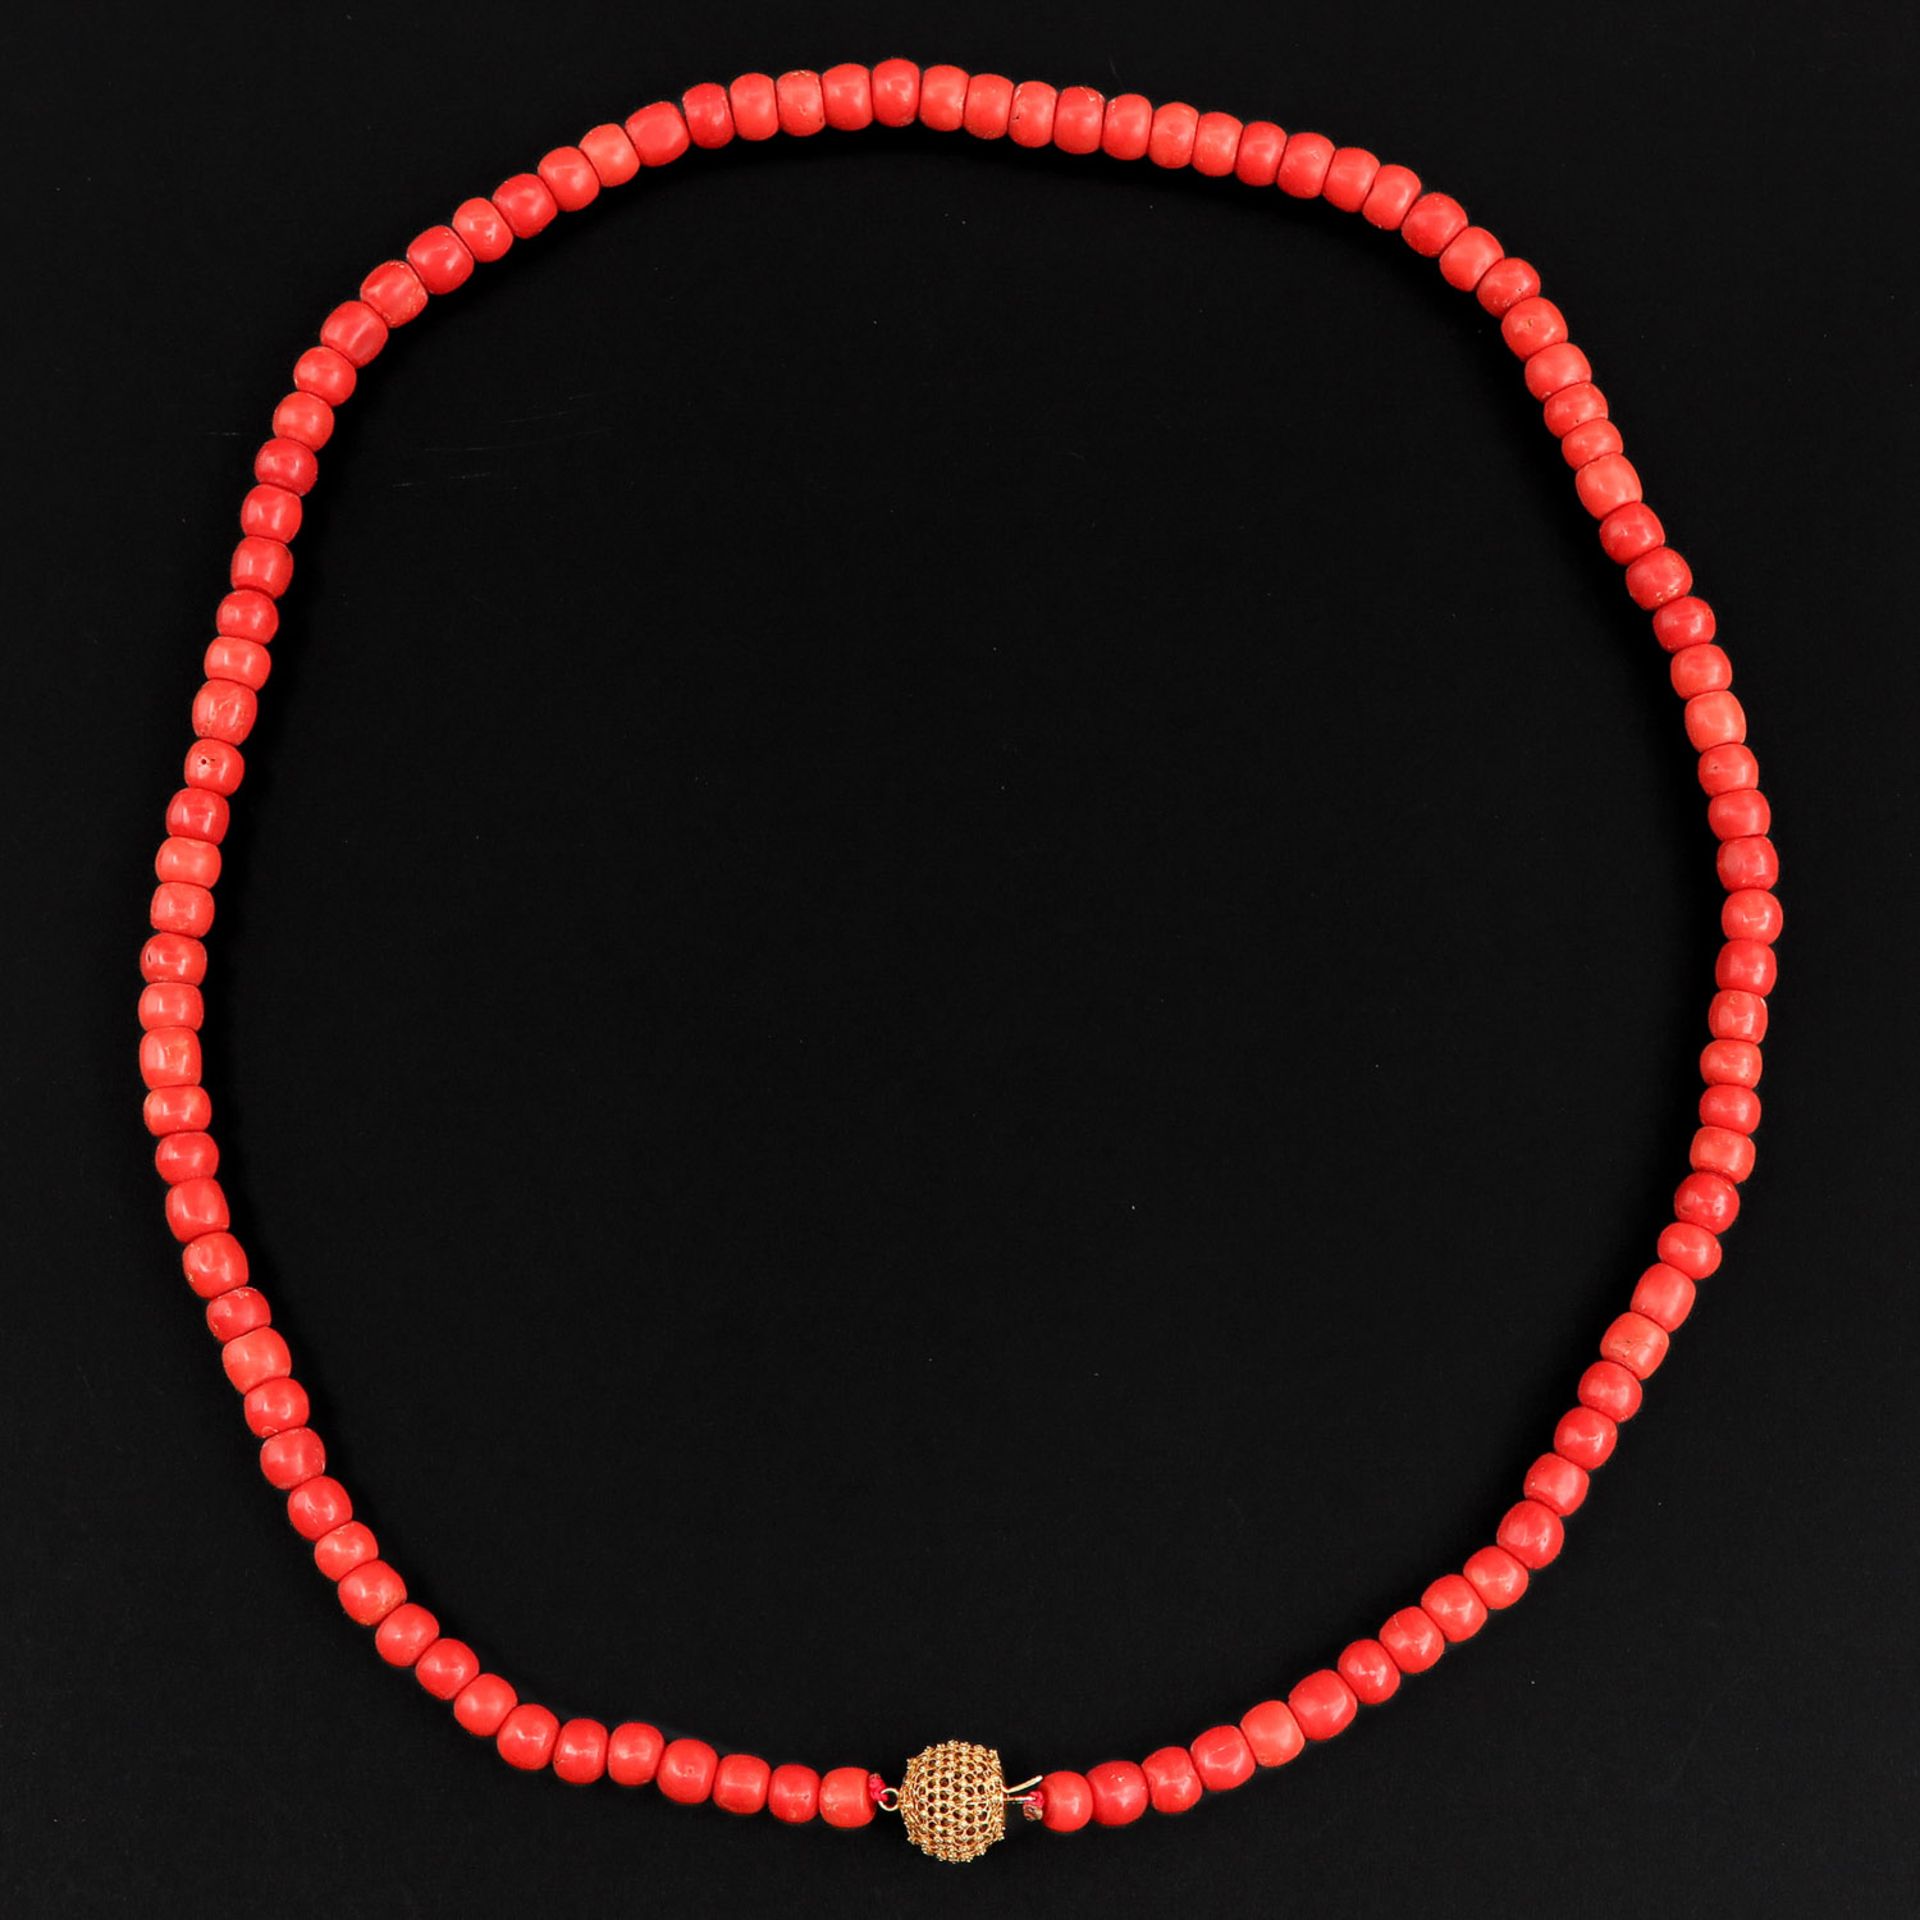 A Single Strand Red Coral Necklace - Image 3 of 7